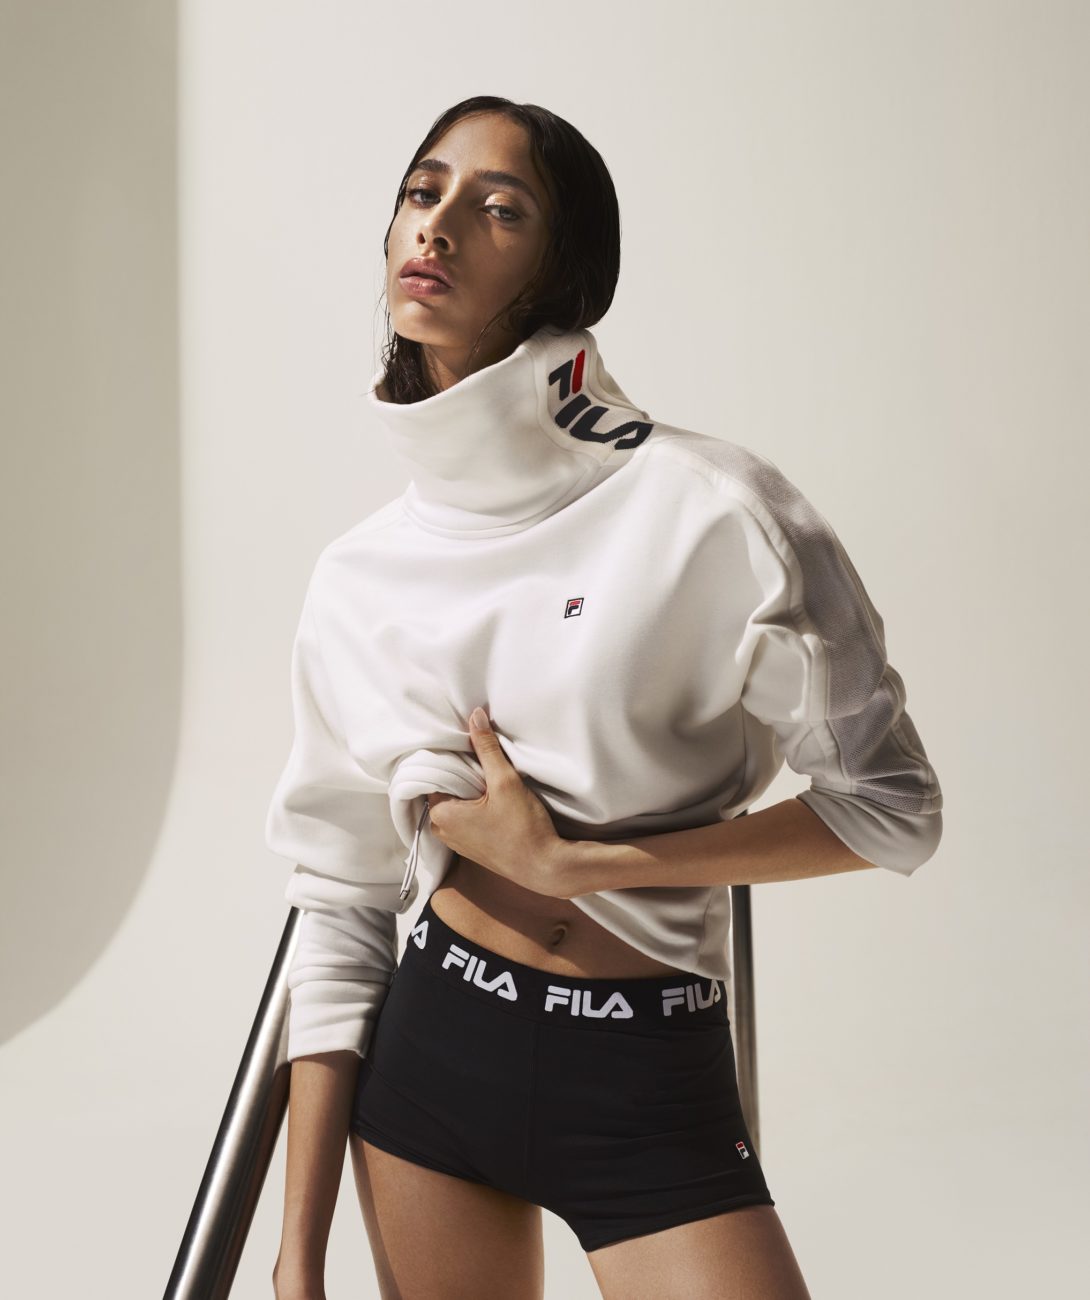 Fila See-Now-Buy-Now Capsule Collection Campaign by Mert and Marcus, Courtesy of Fila